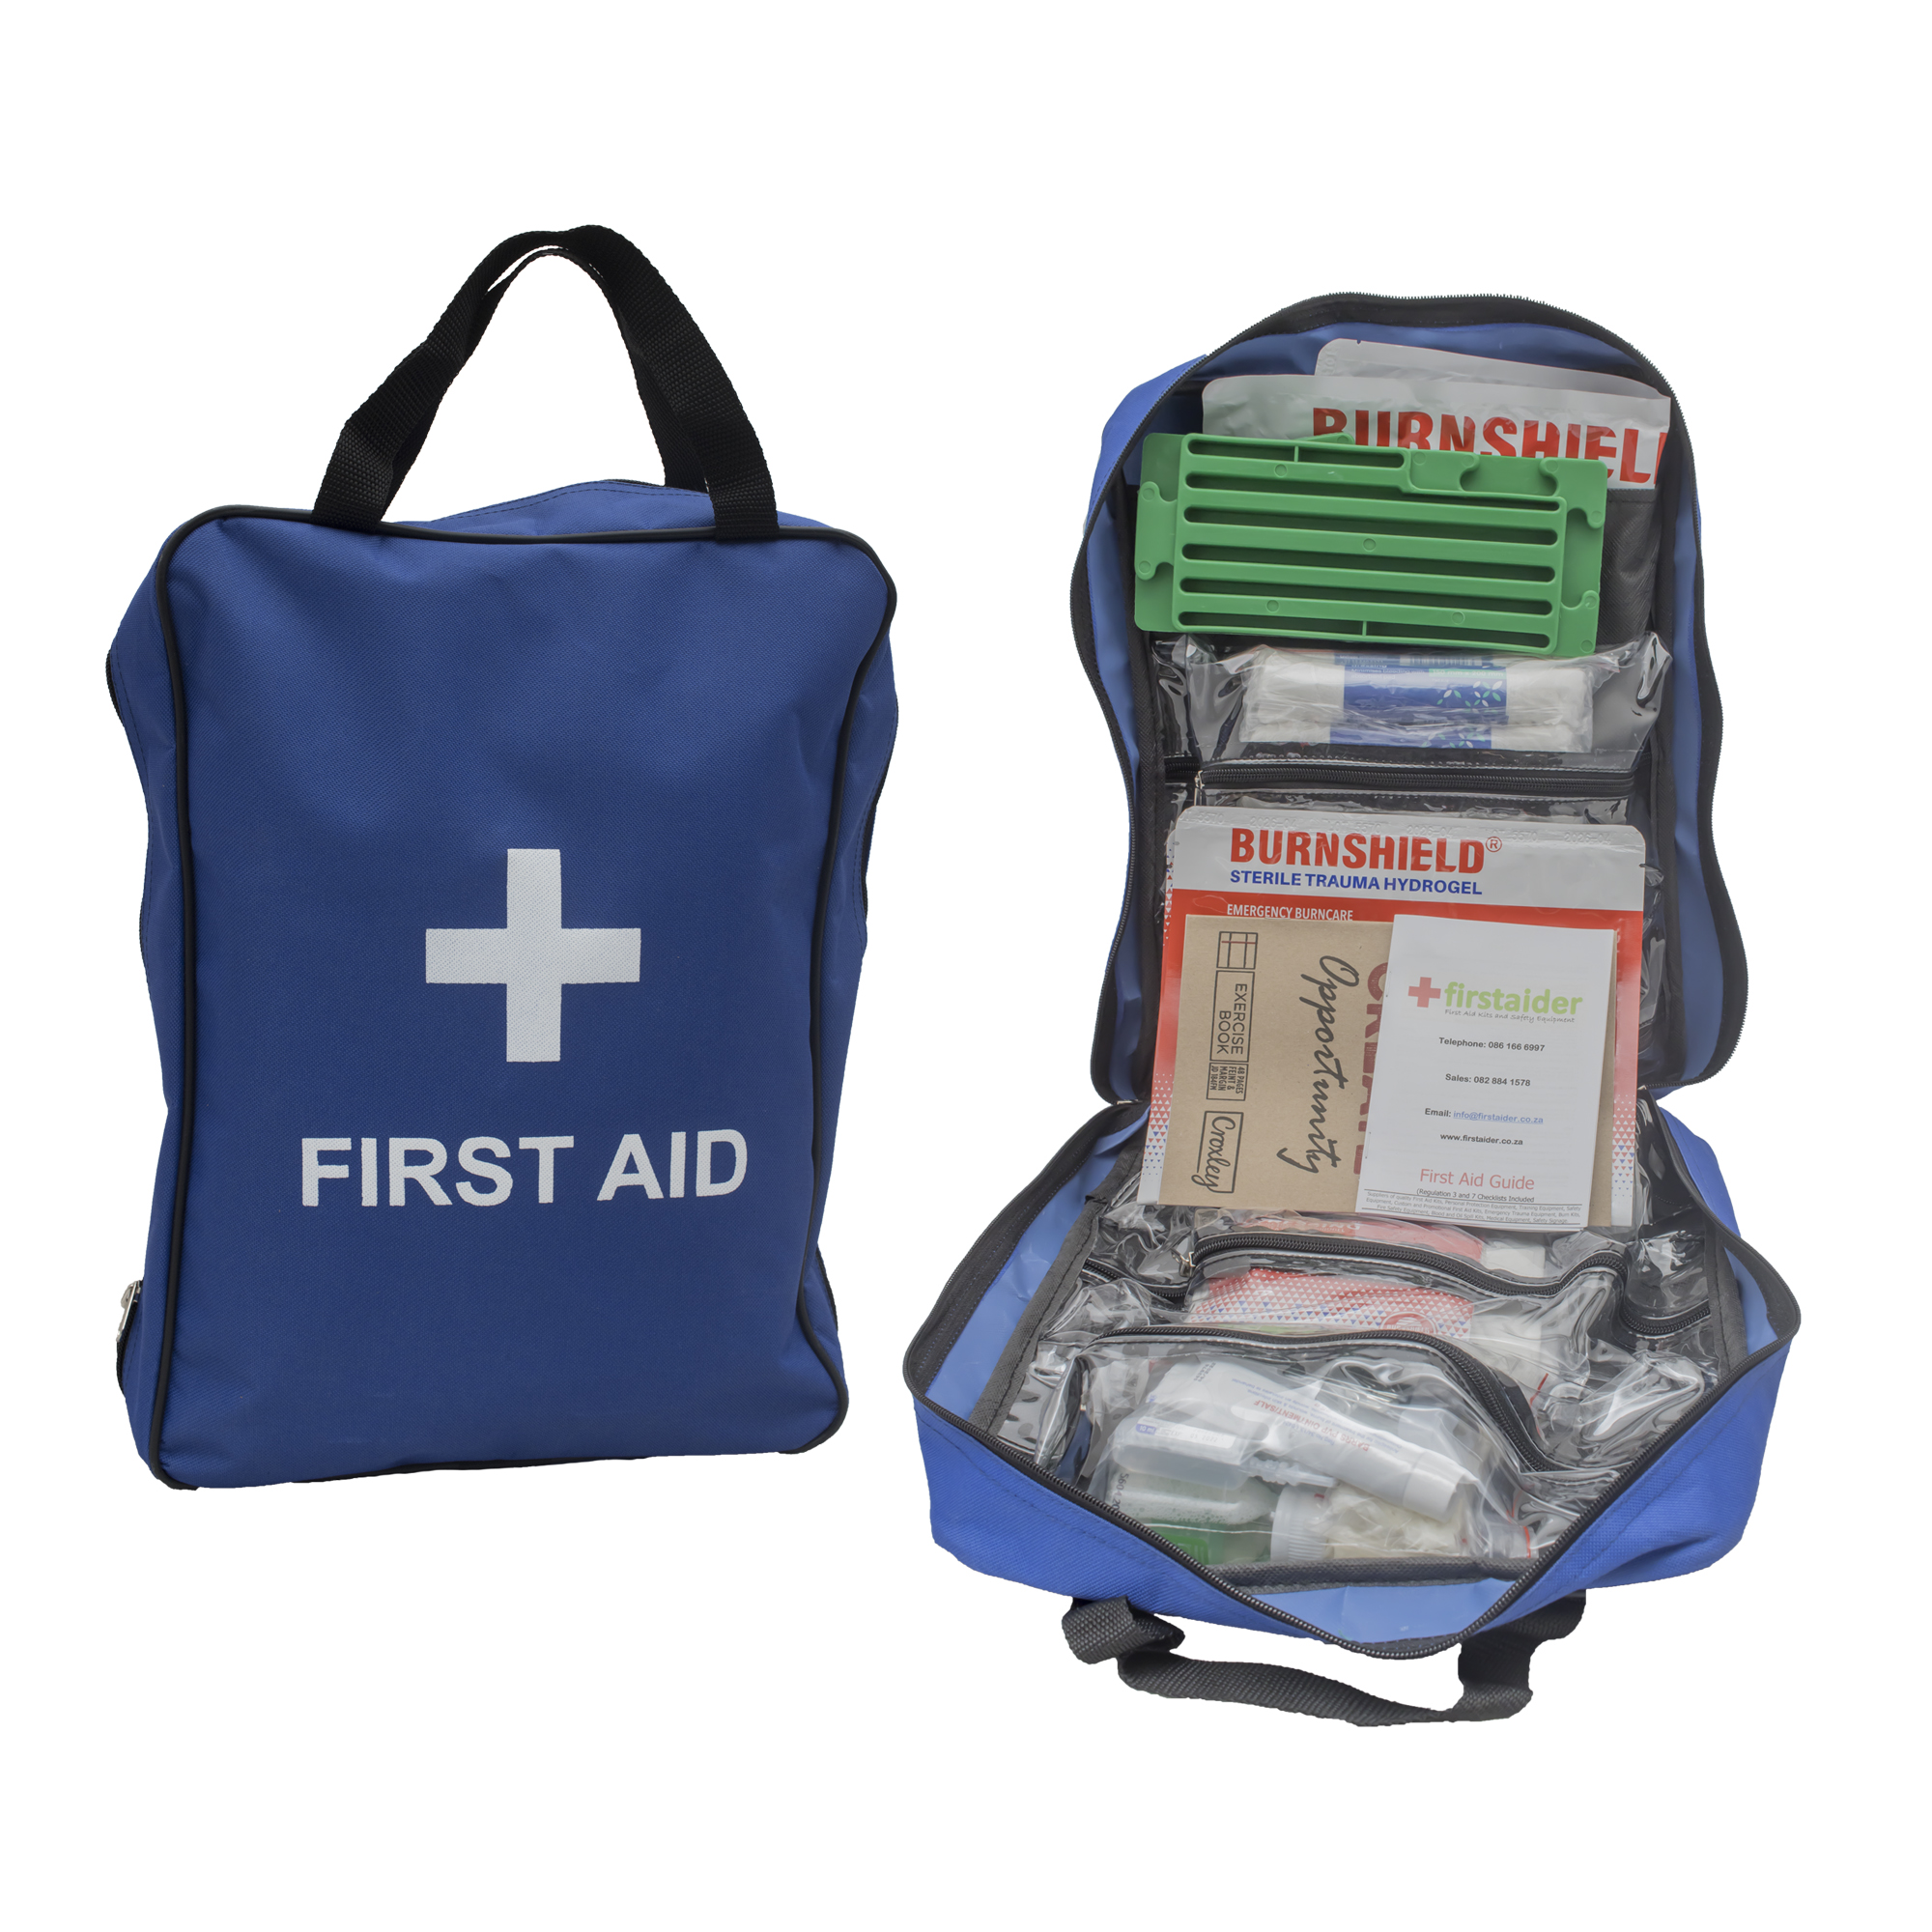 https://www.firstaider.co.za/wp-content/uploads/2021/08/electrical-kit.jpg